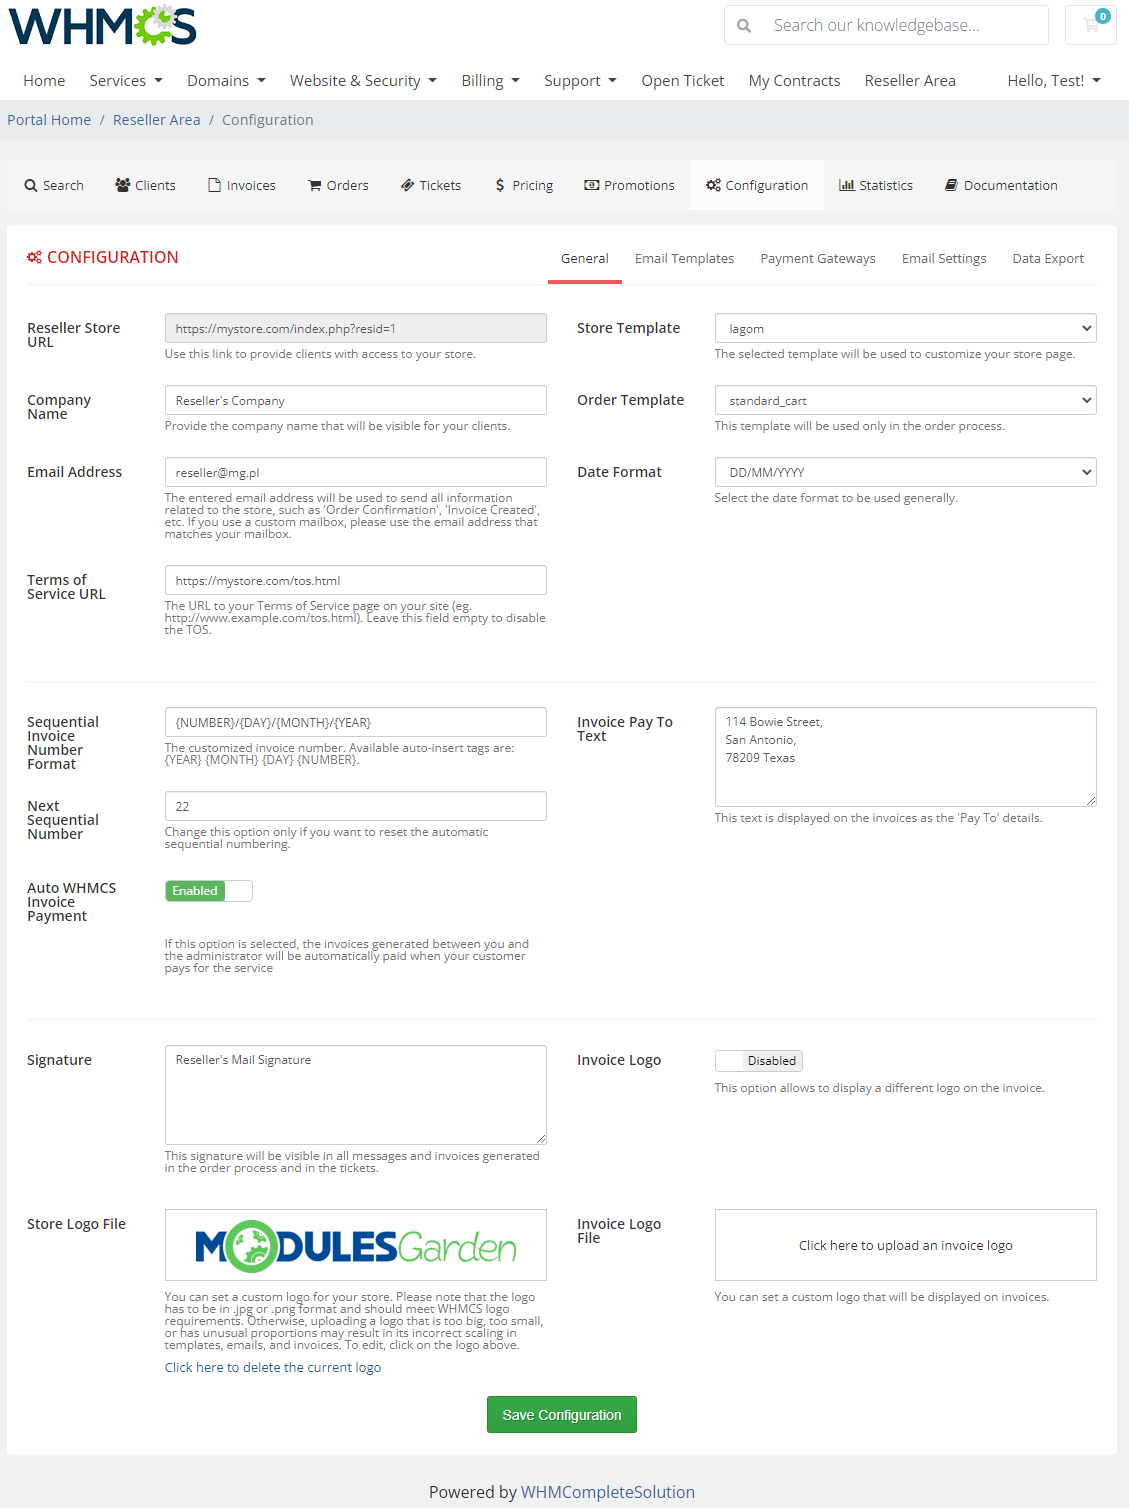 Resellers Center For WHMCS: Module Screenshot 34